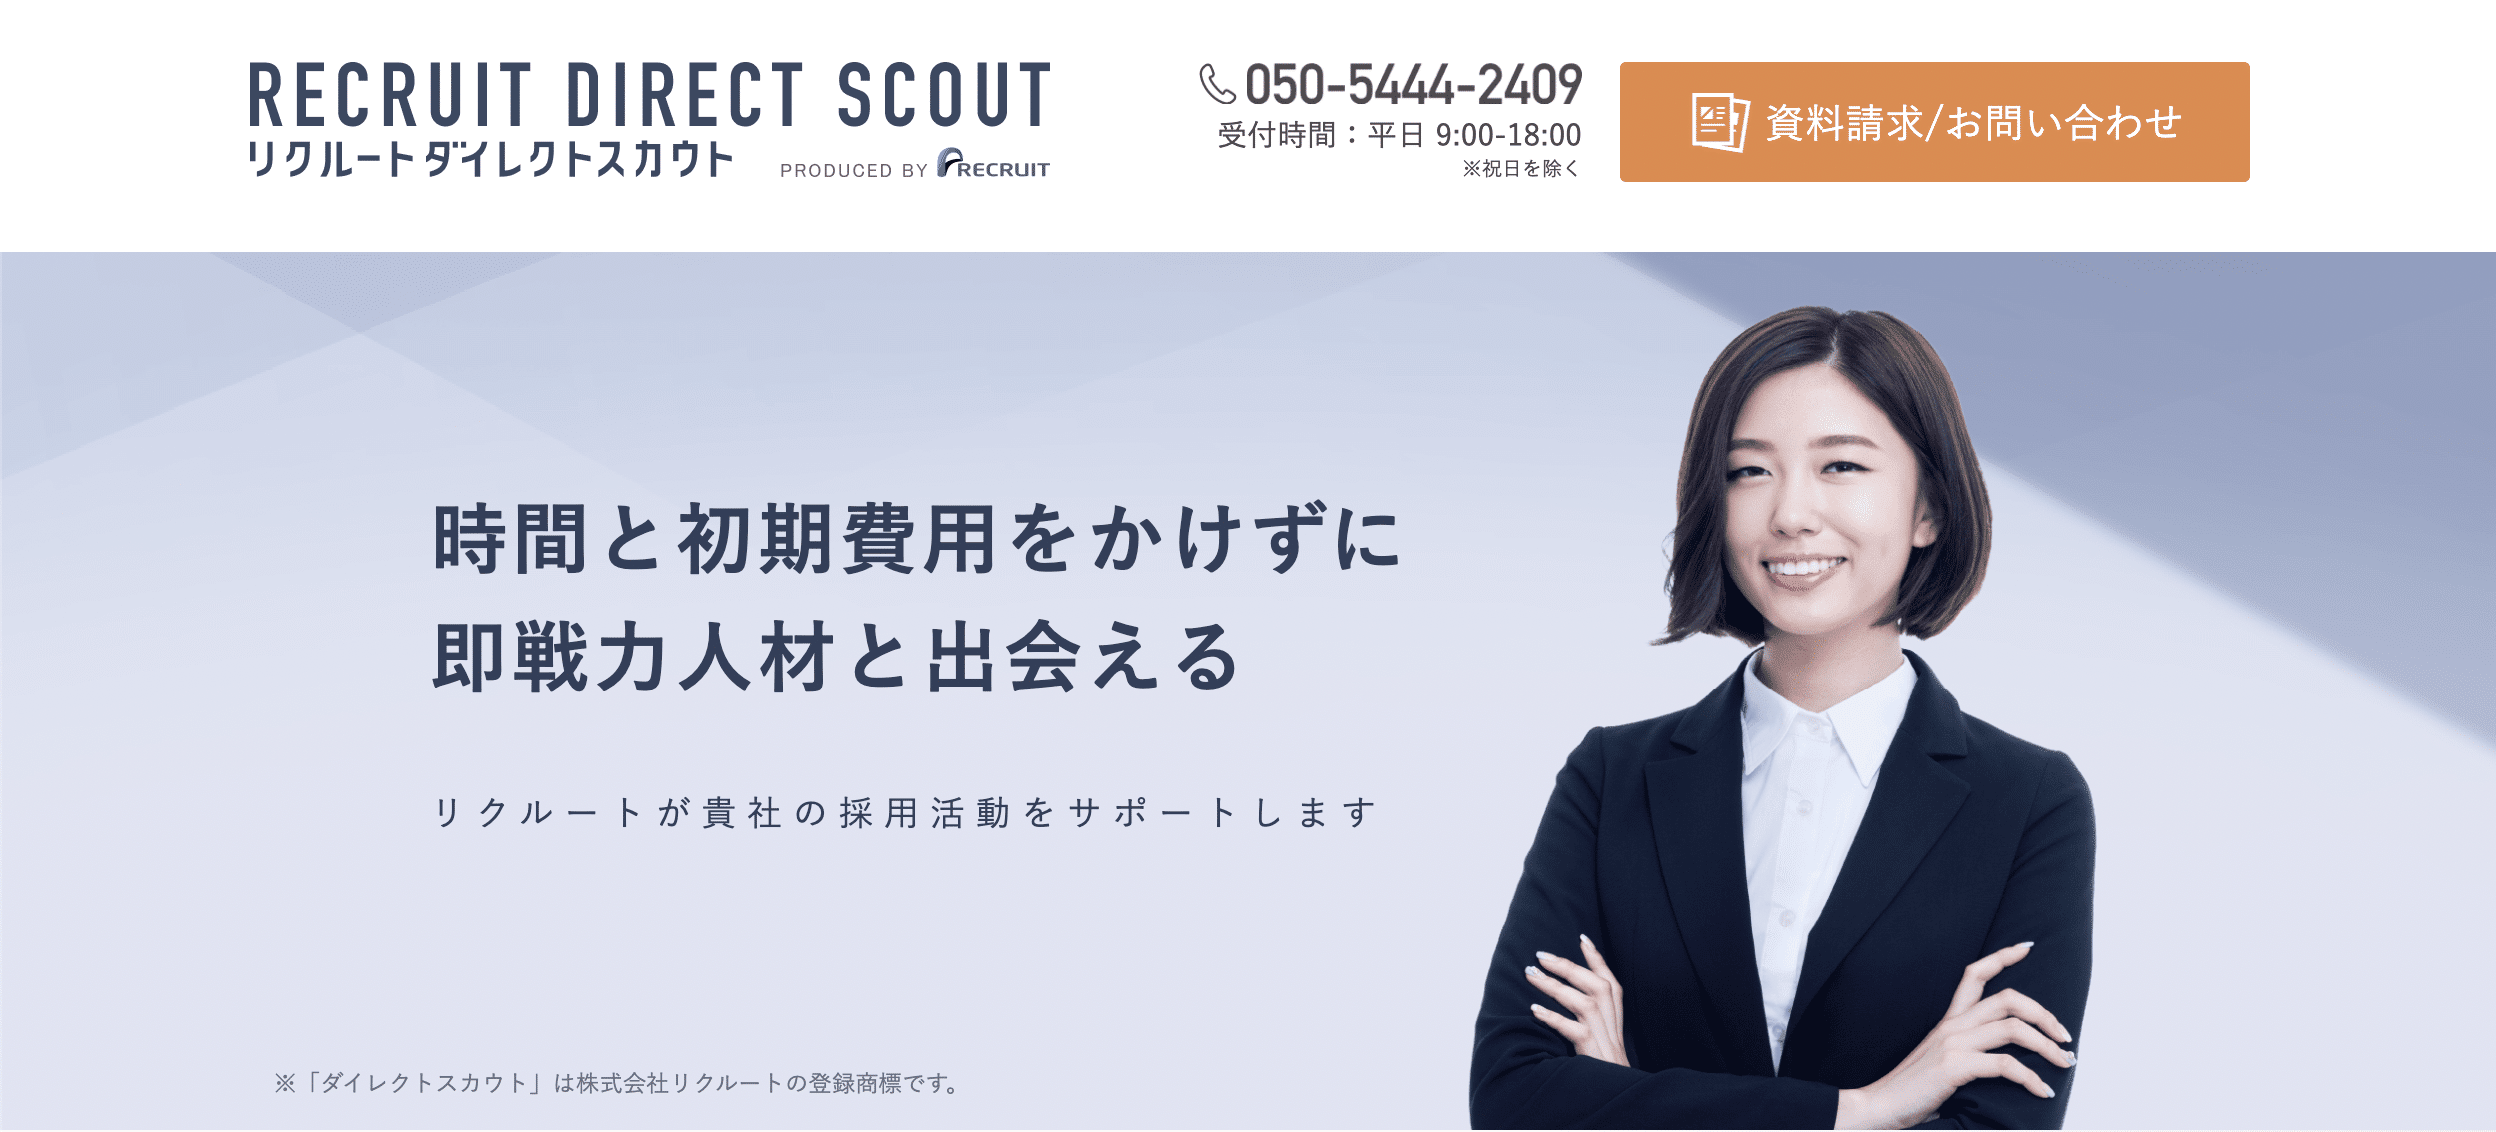 recruit_directscout